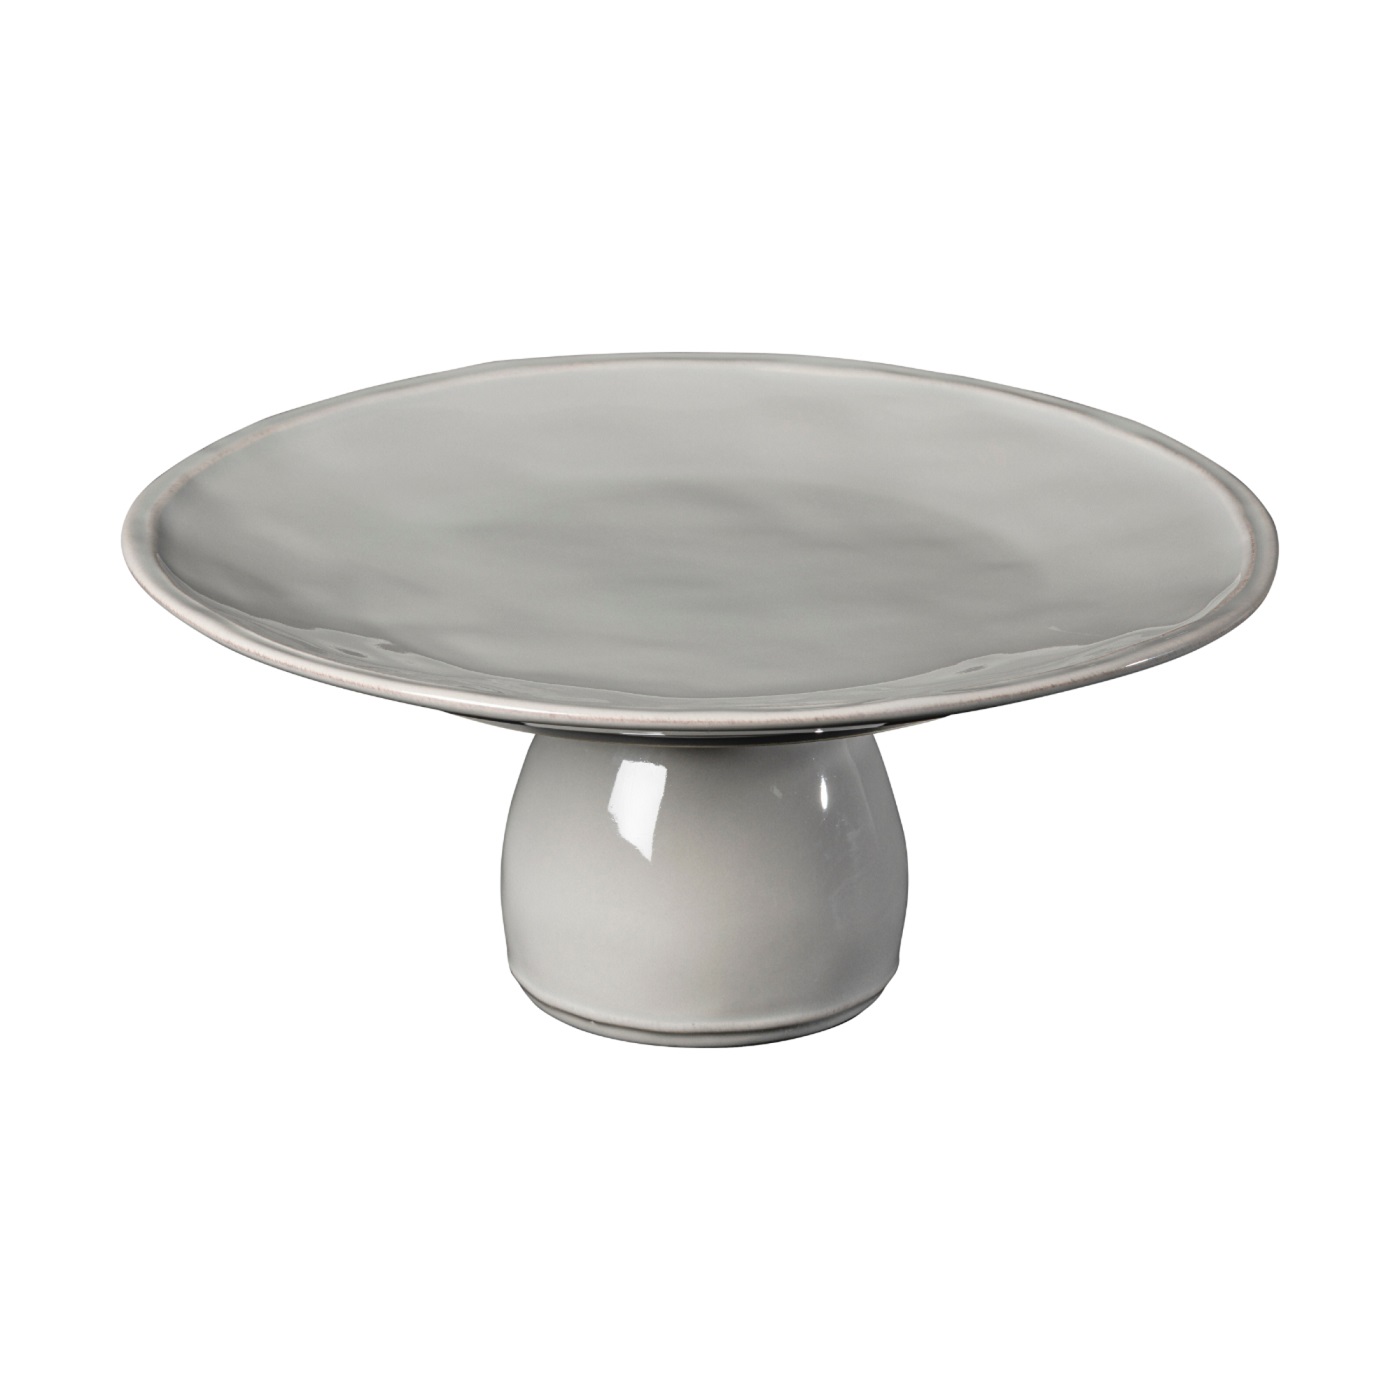 Fontana Dove Grey Footed Plate 28cm Gift